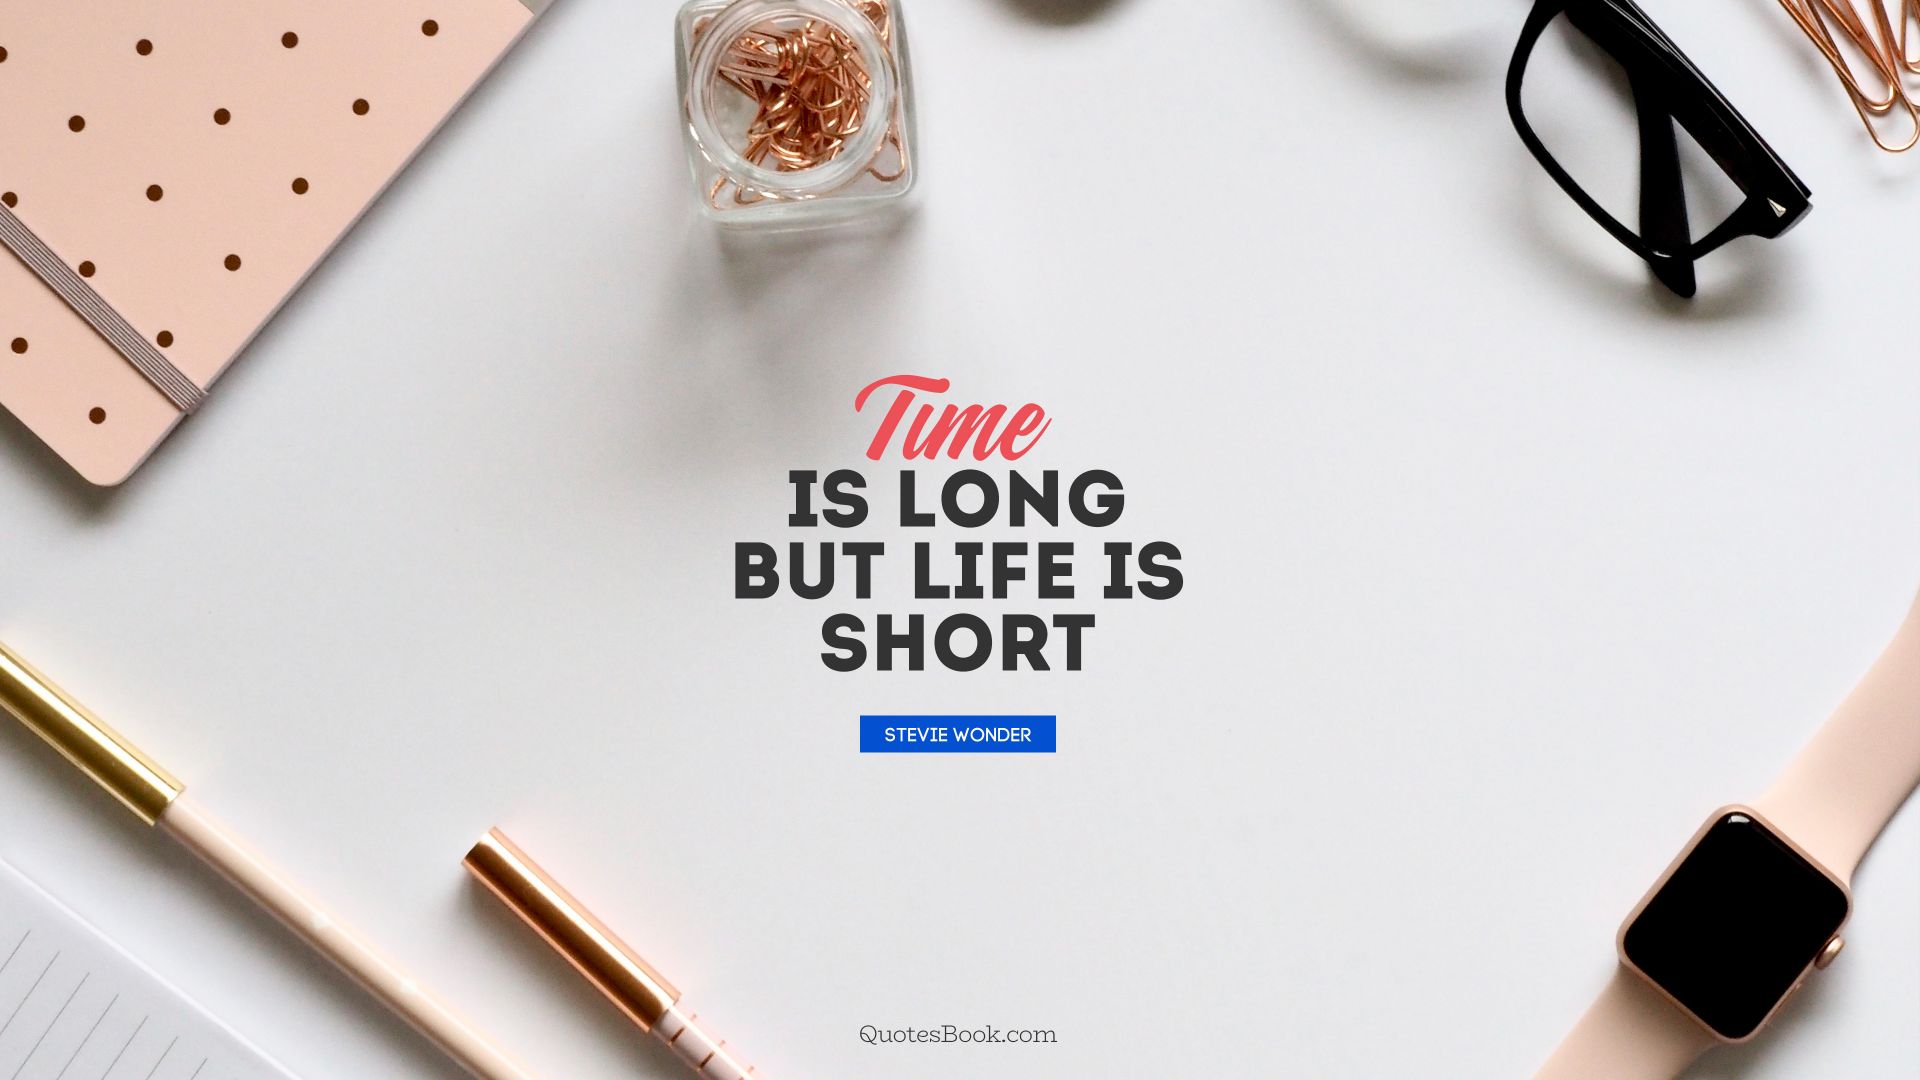 Time is long but life is short. - Quote by Stevie Wonder